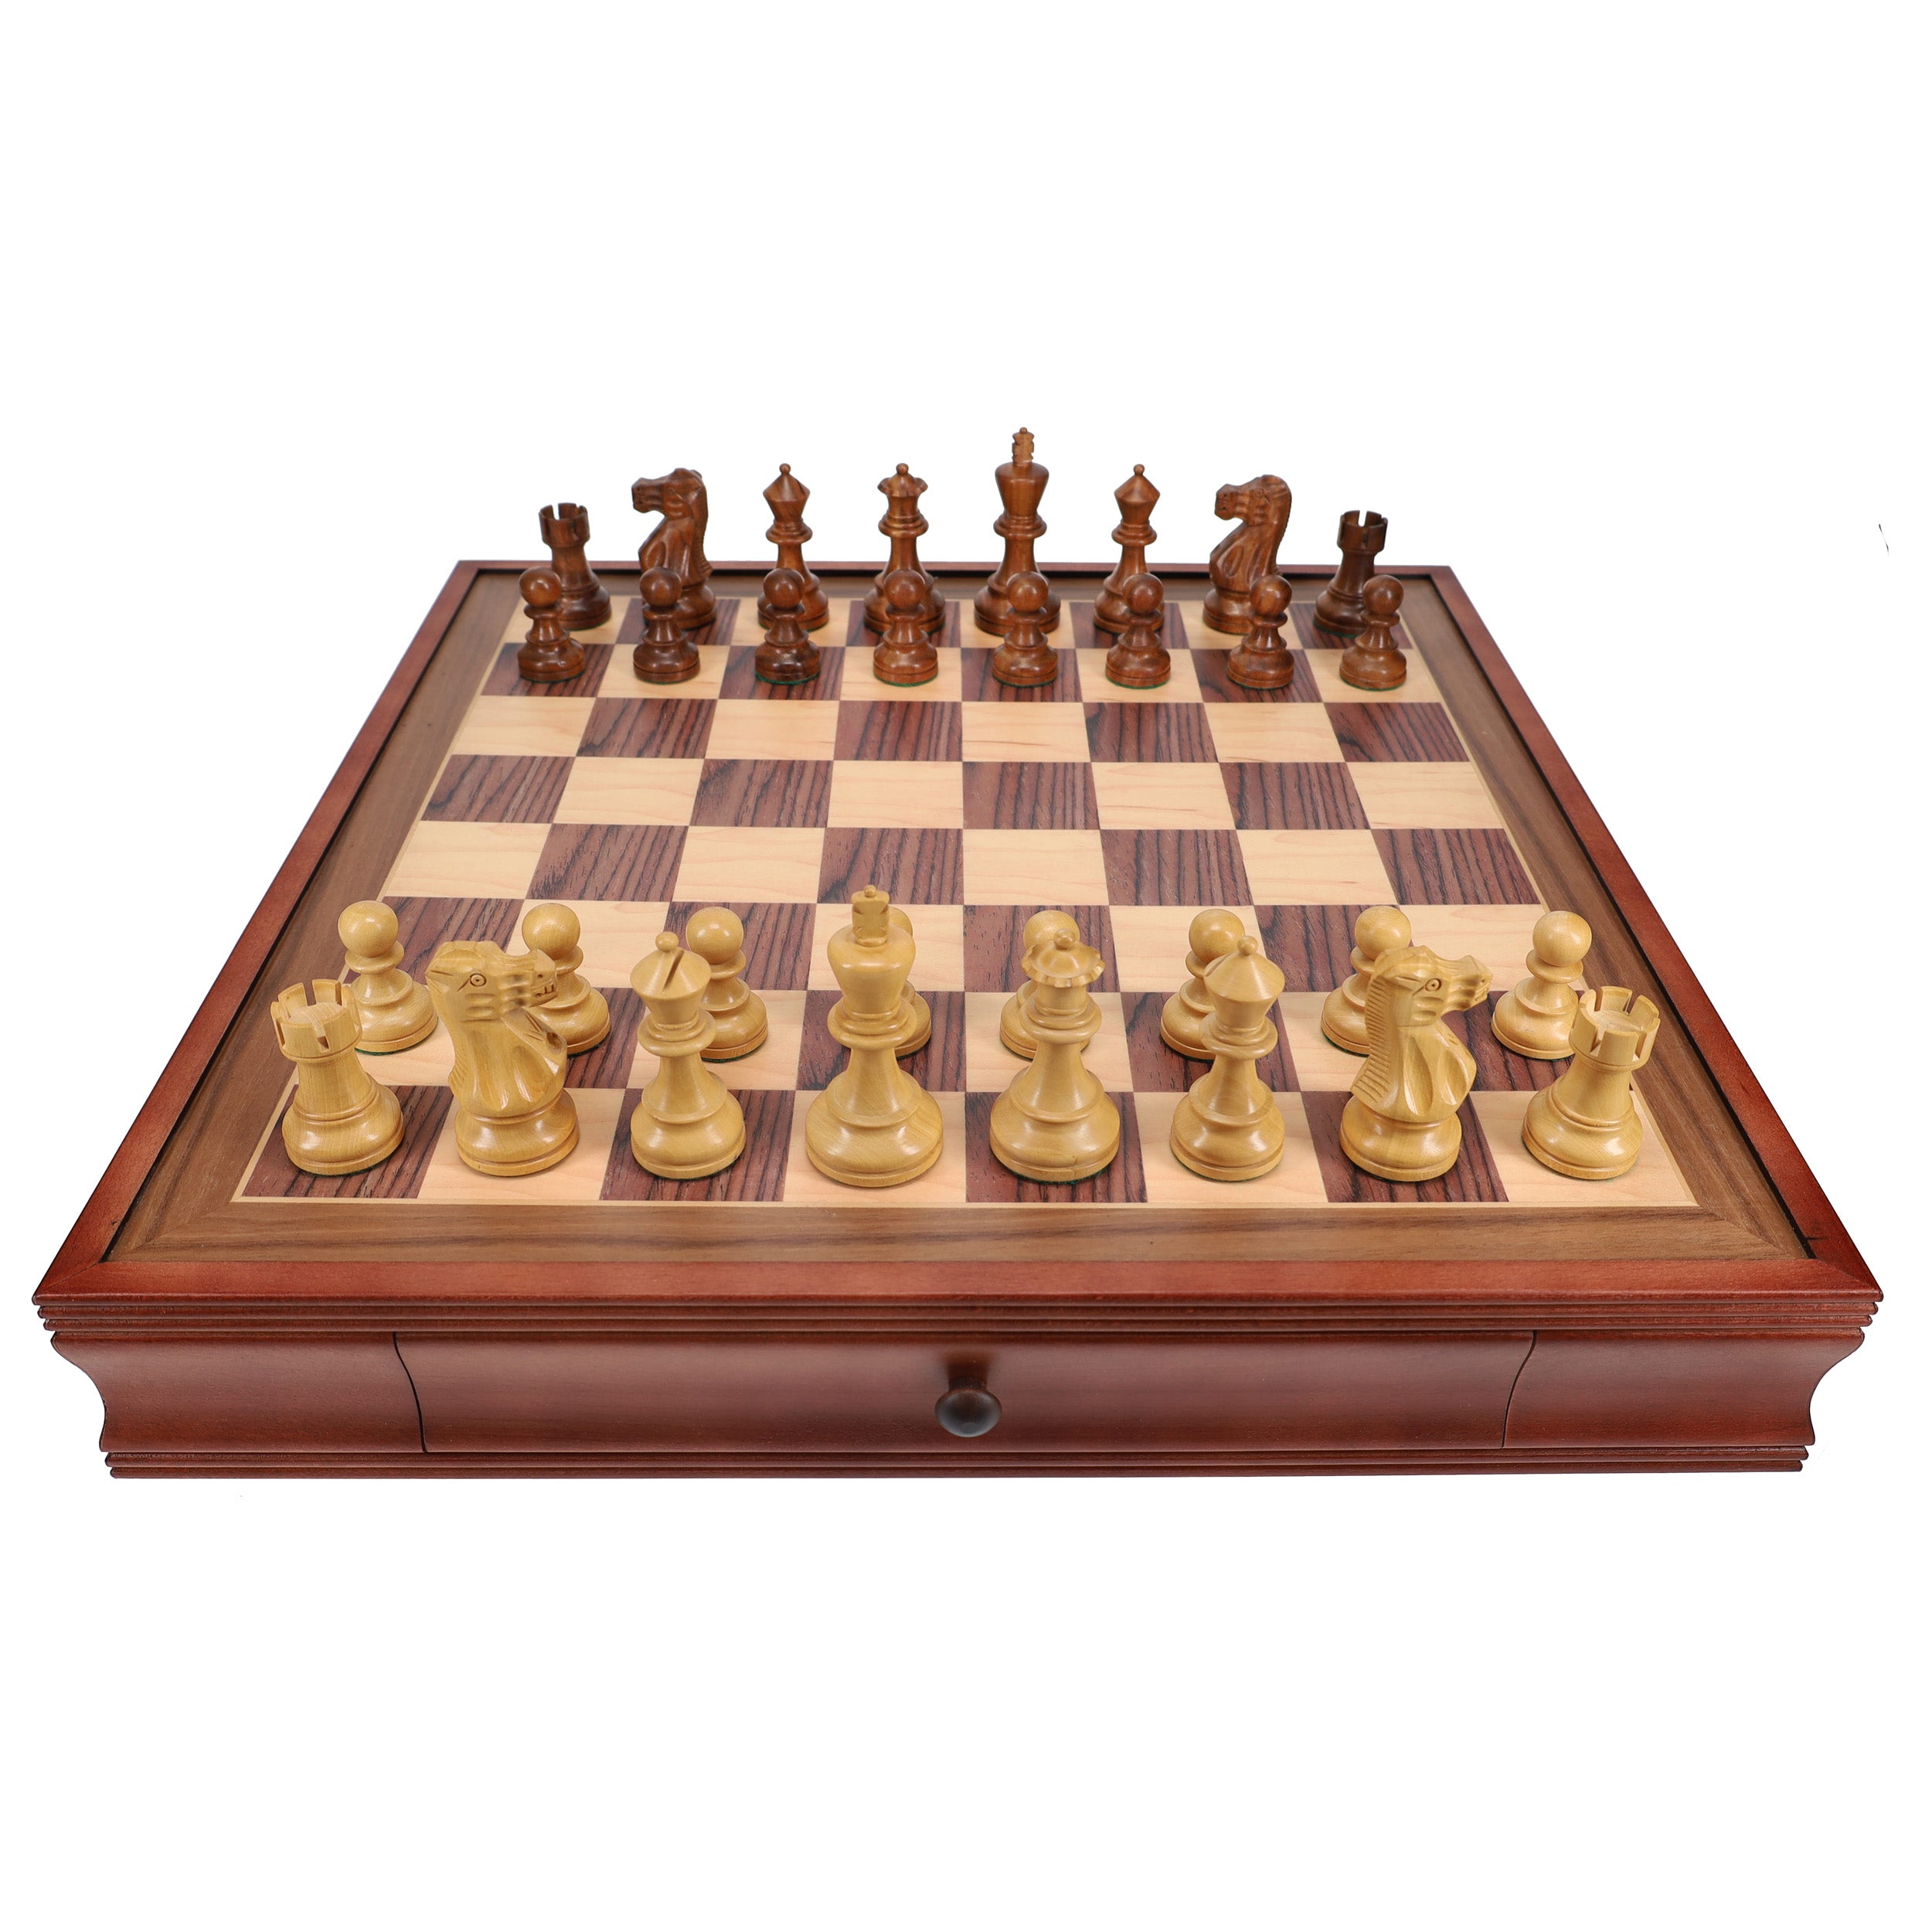 Grand English Style Chess Set with Storage Drawers